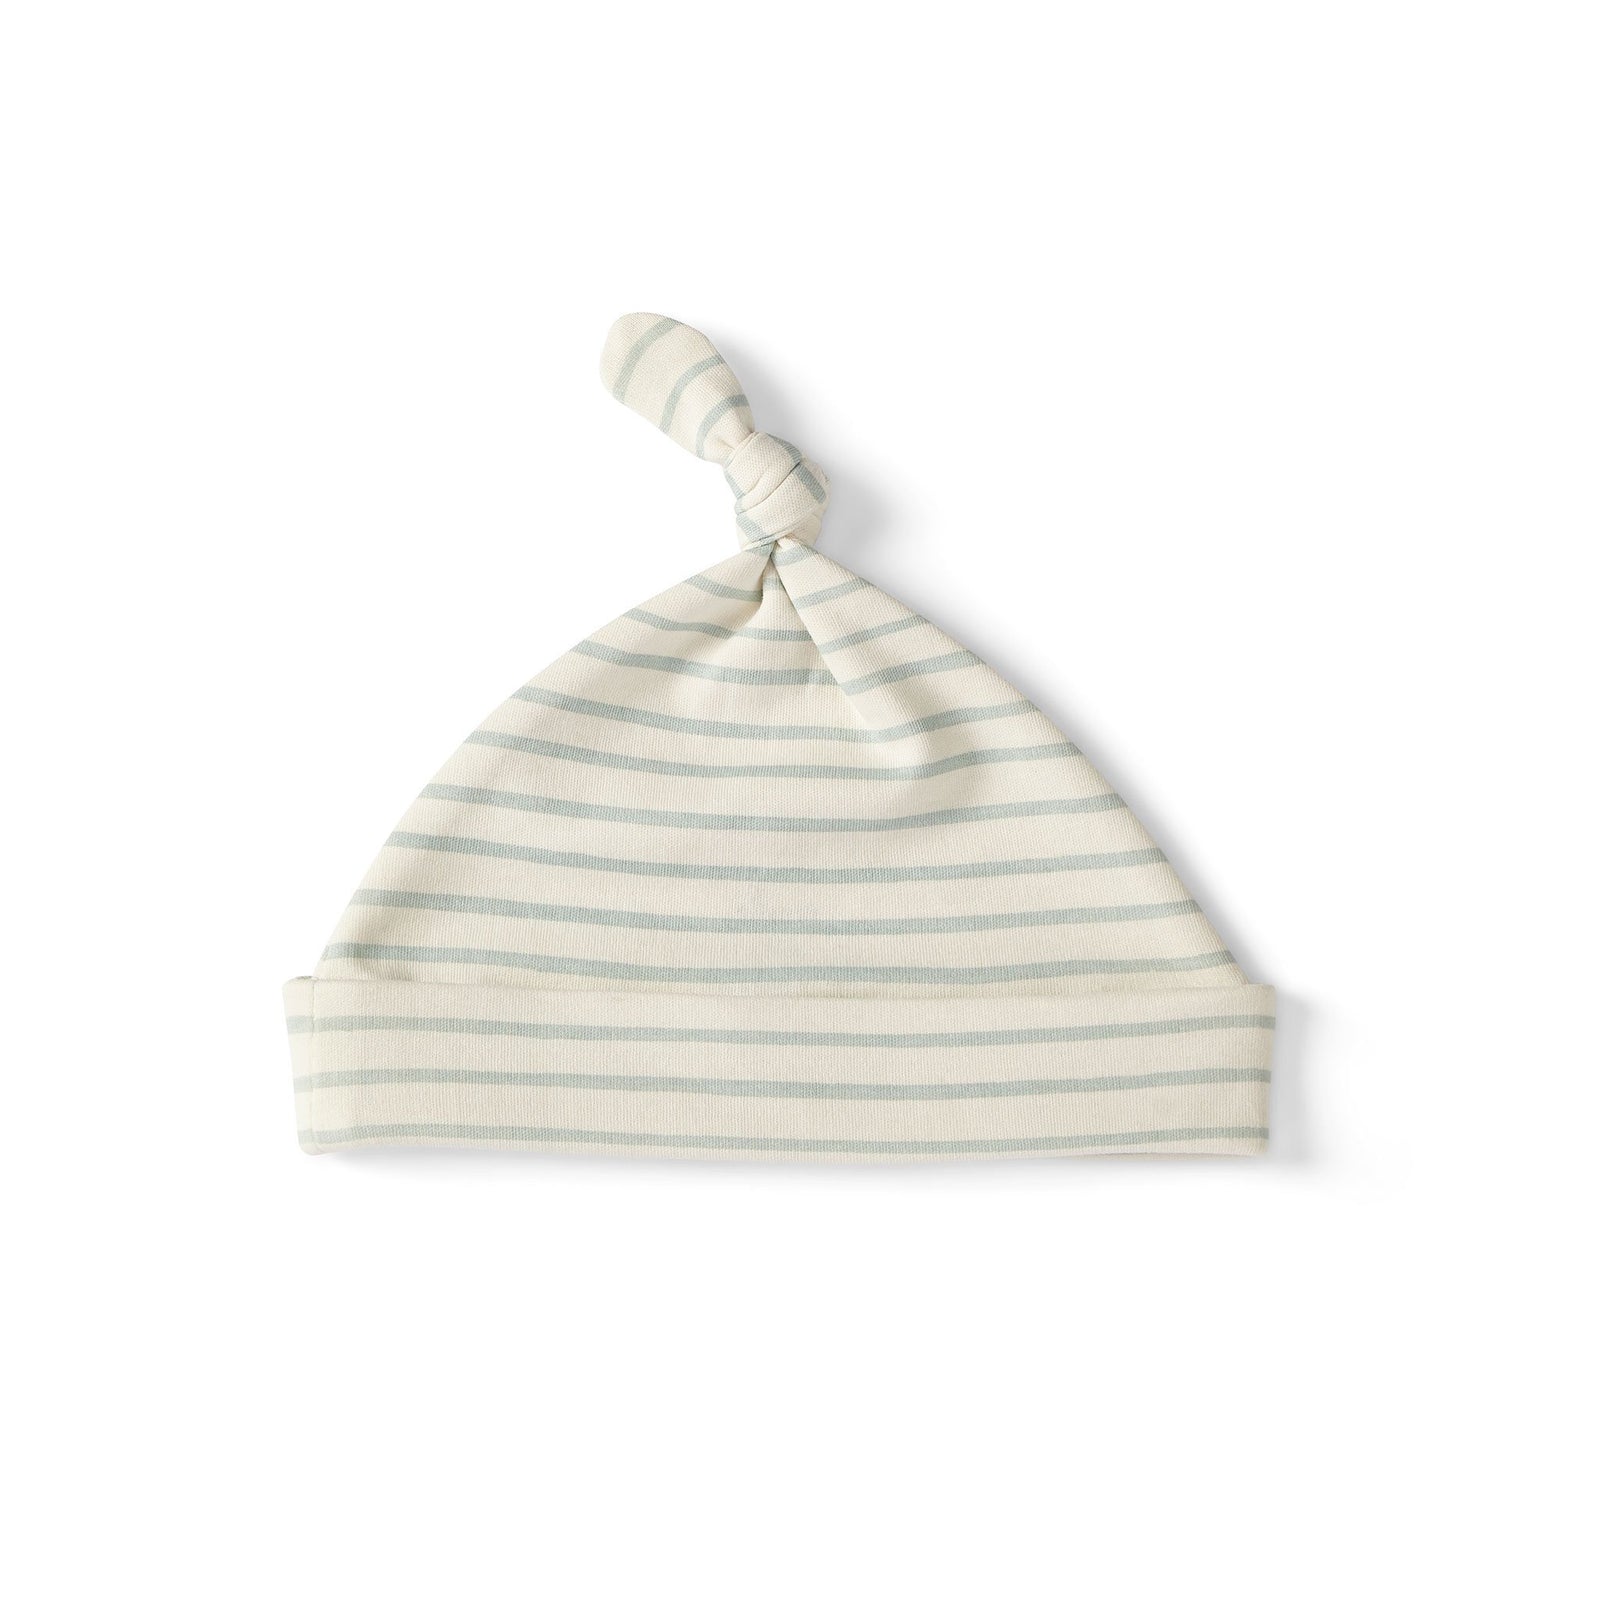 Pehr Stripes Away Sea Organic Knot Hat. GOTS Certified Organic Cotton & Dyes. White with light blue stripes.